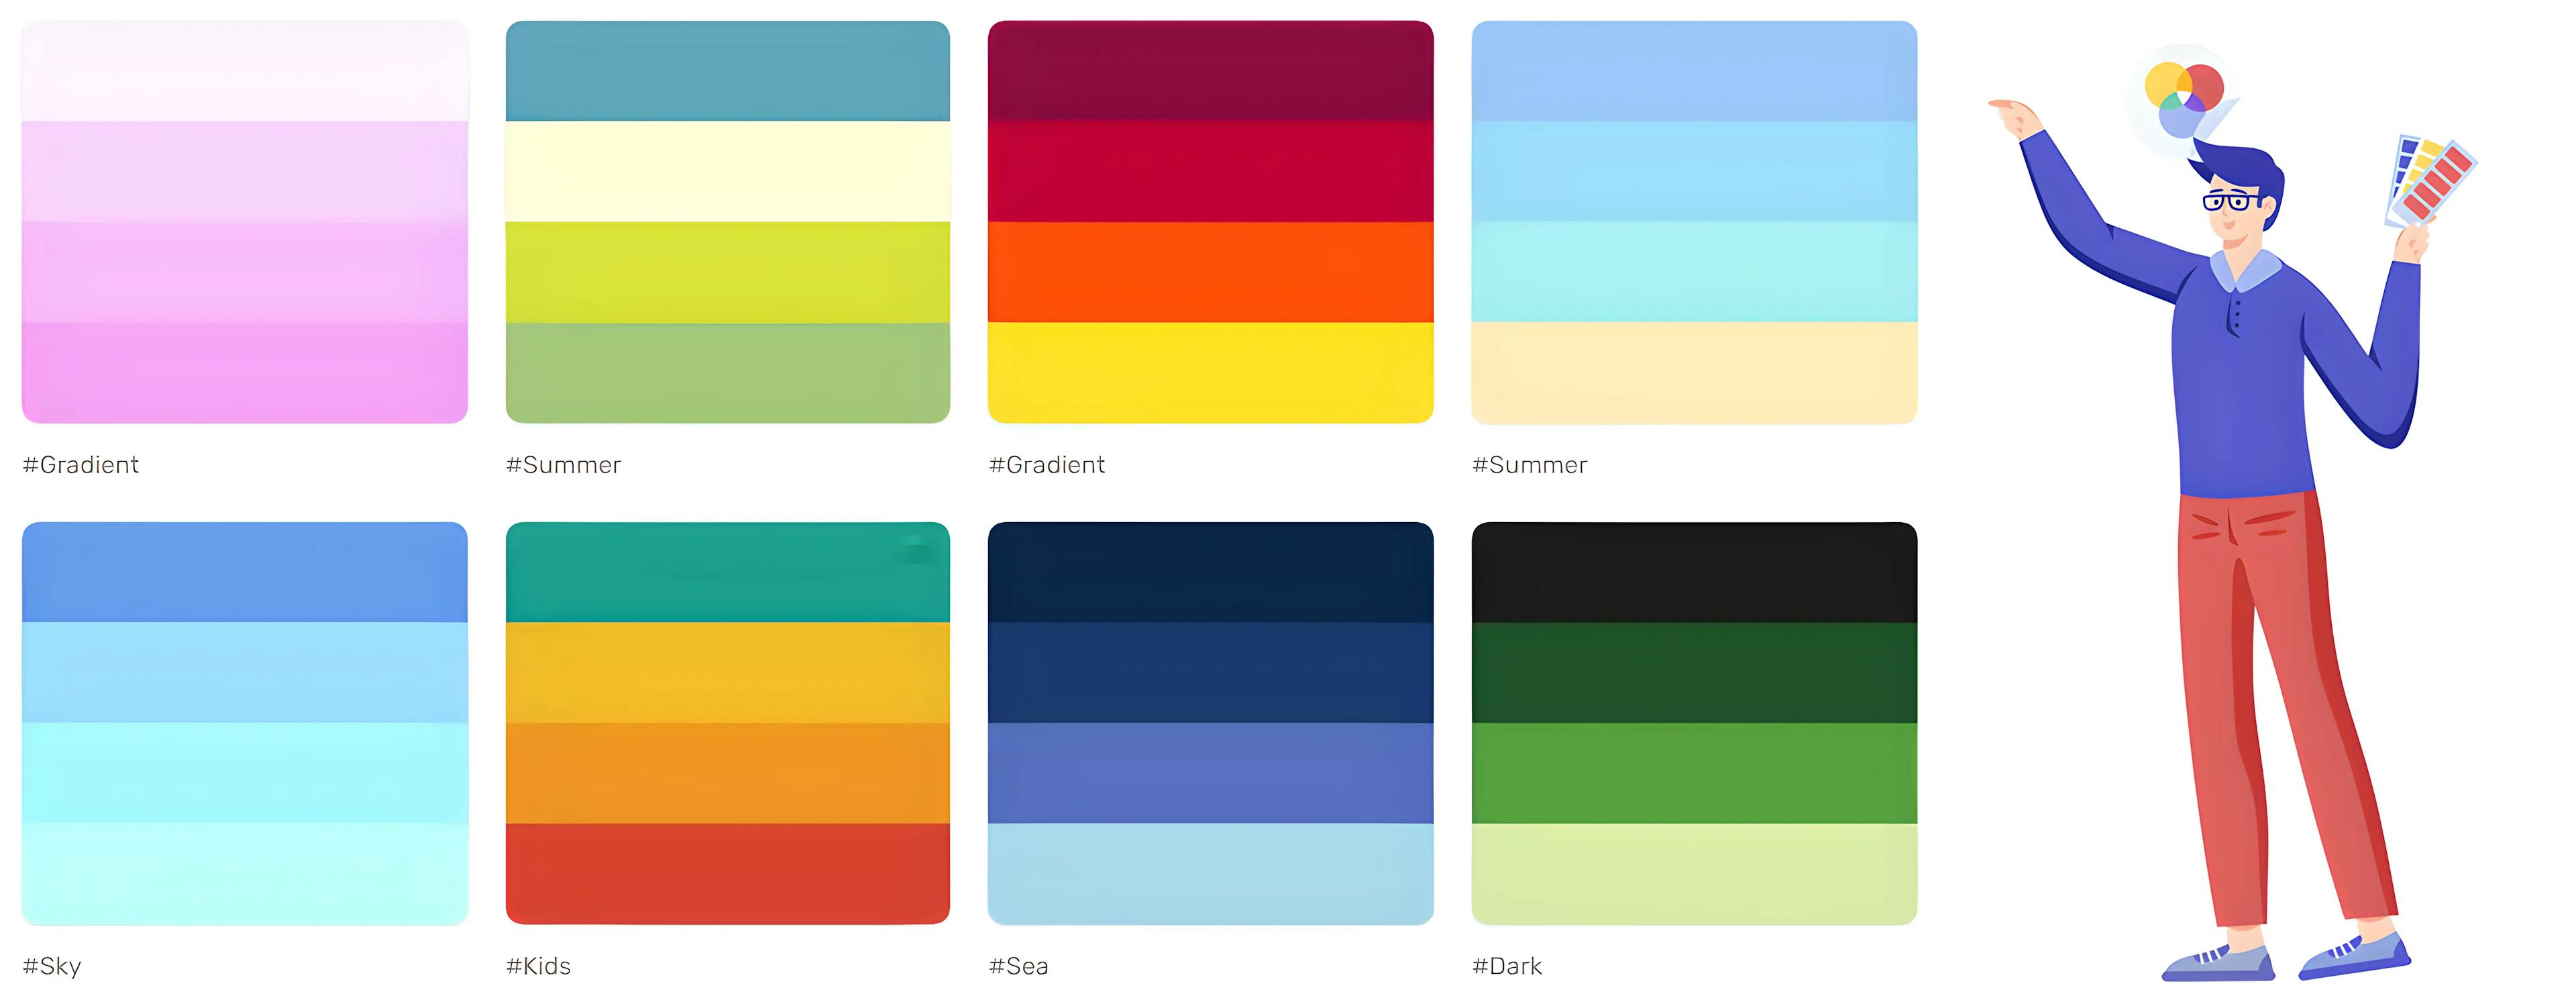 Color Palette with a man in the image